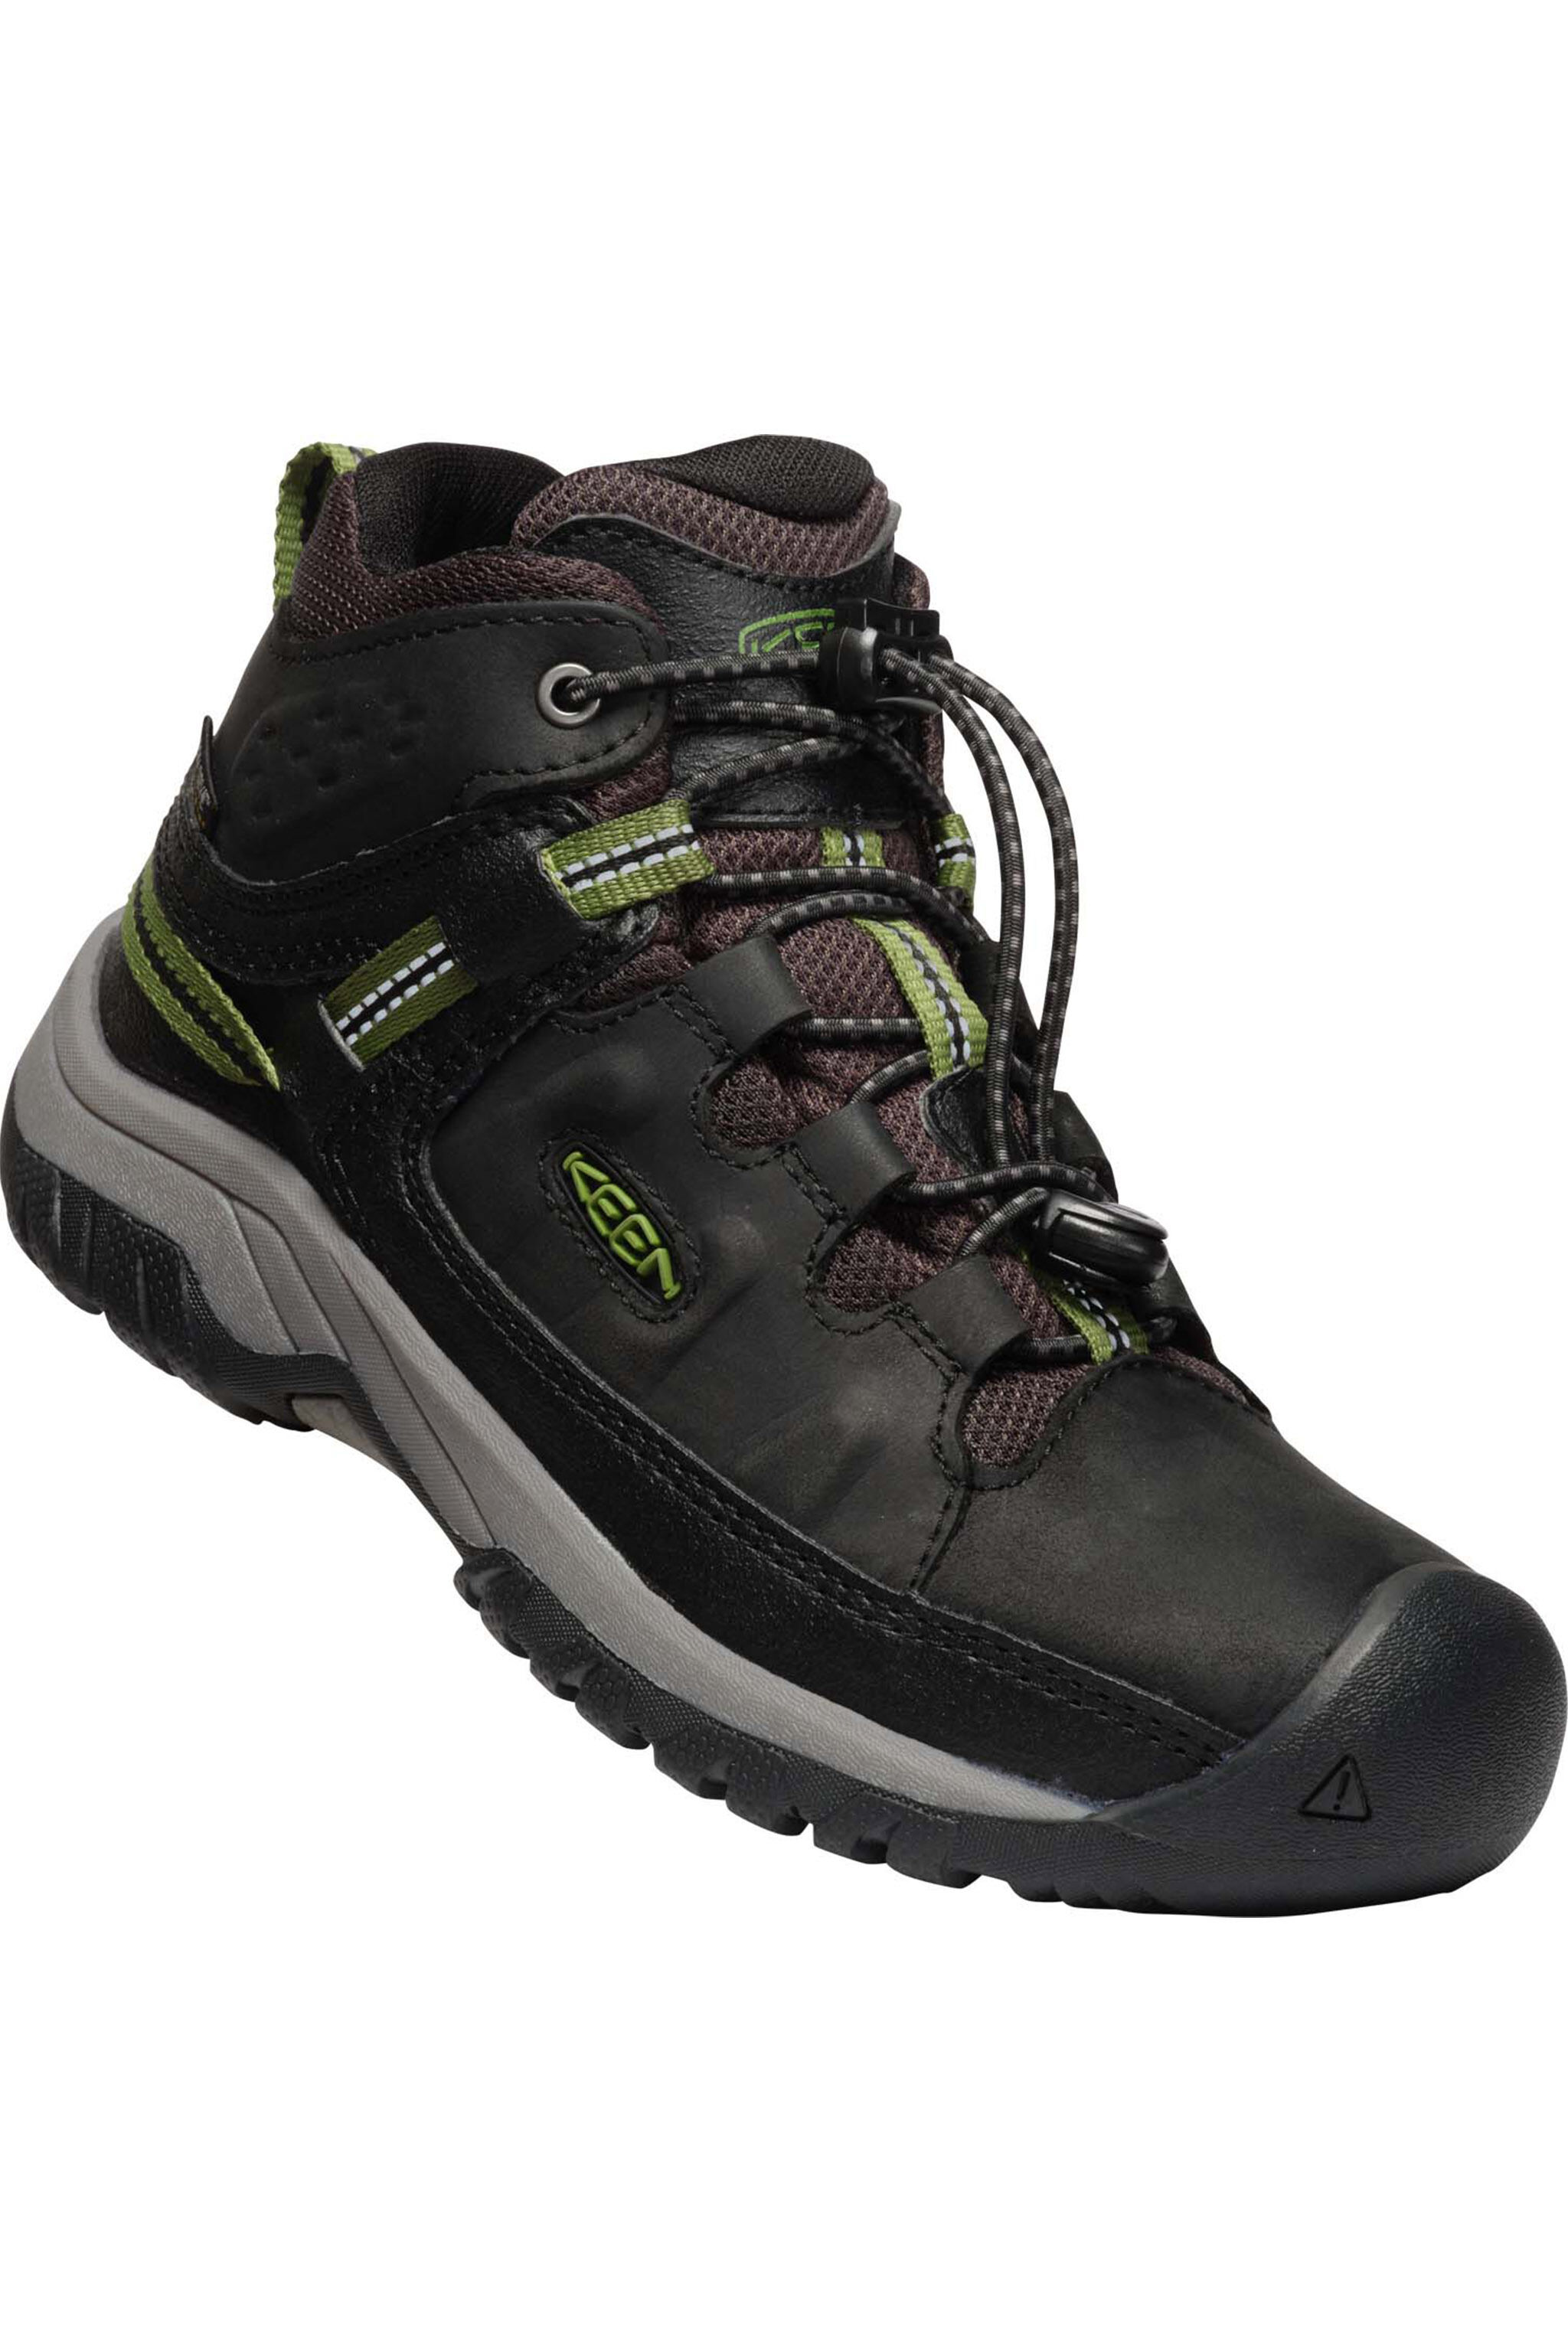 keen youth hiking boots